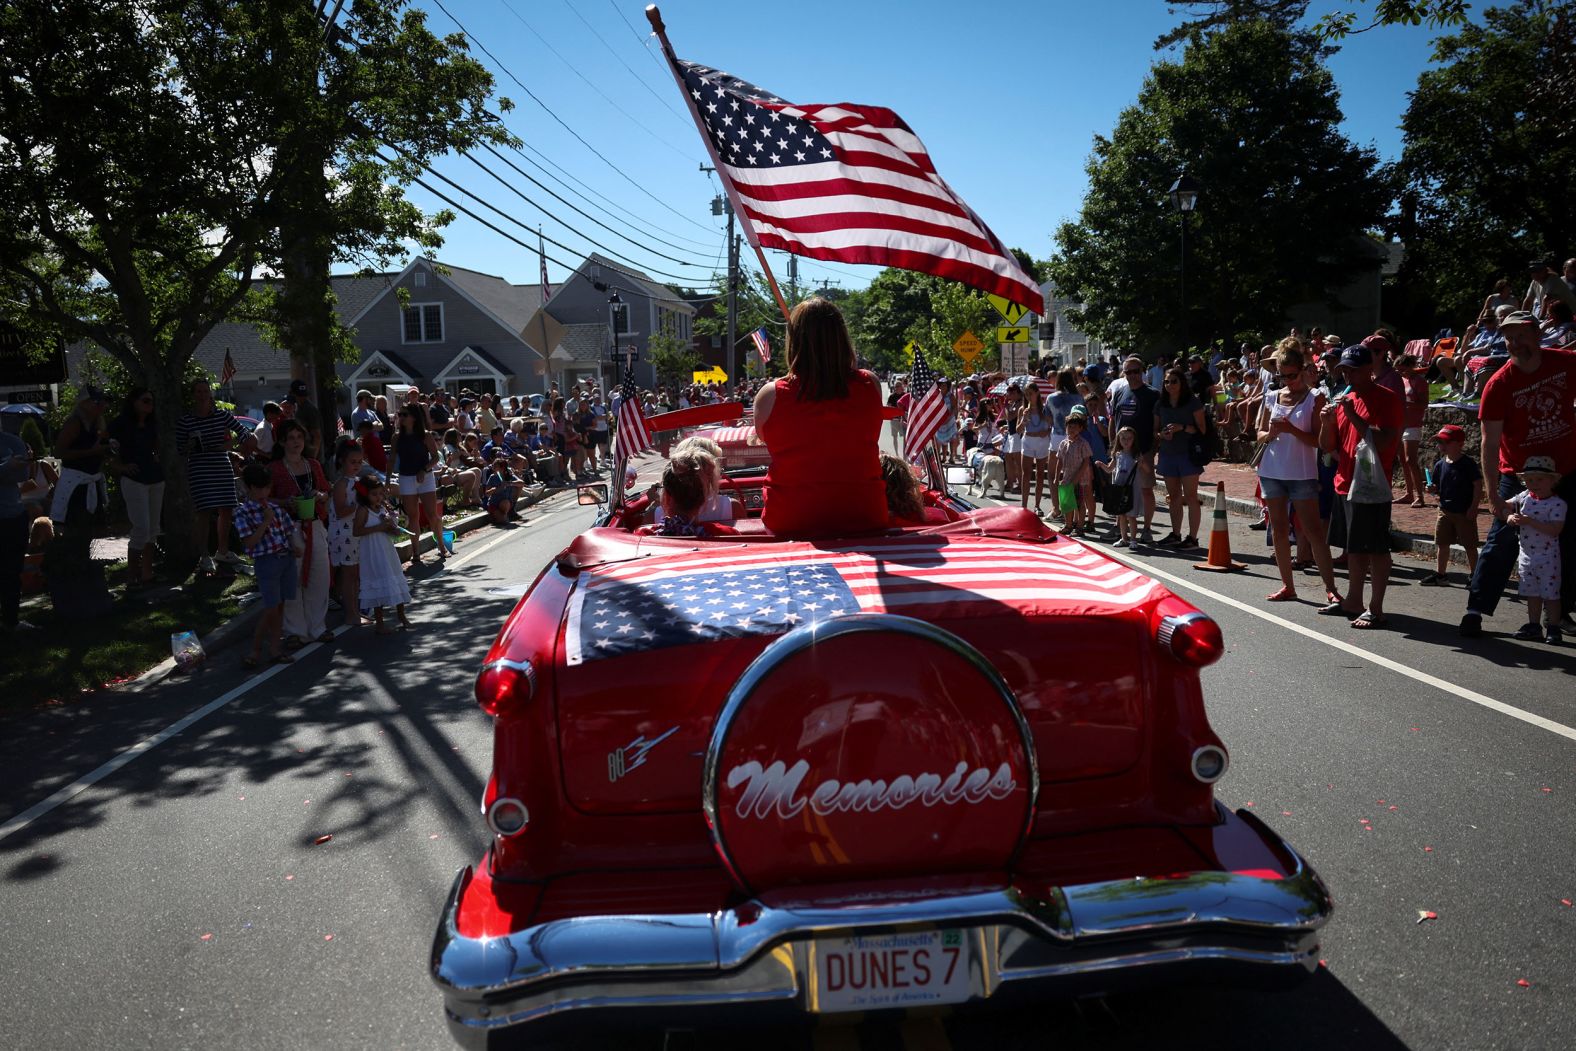 A woman waves the American flag on an antique car during a Fourth of July parade in Barnstable, Massachusetts, on Monday.